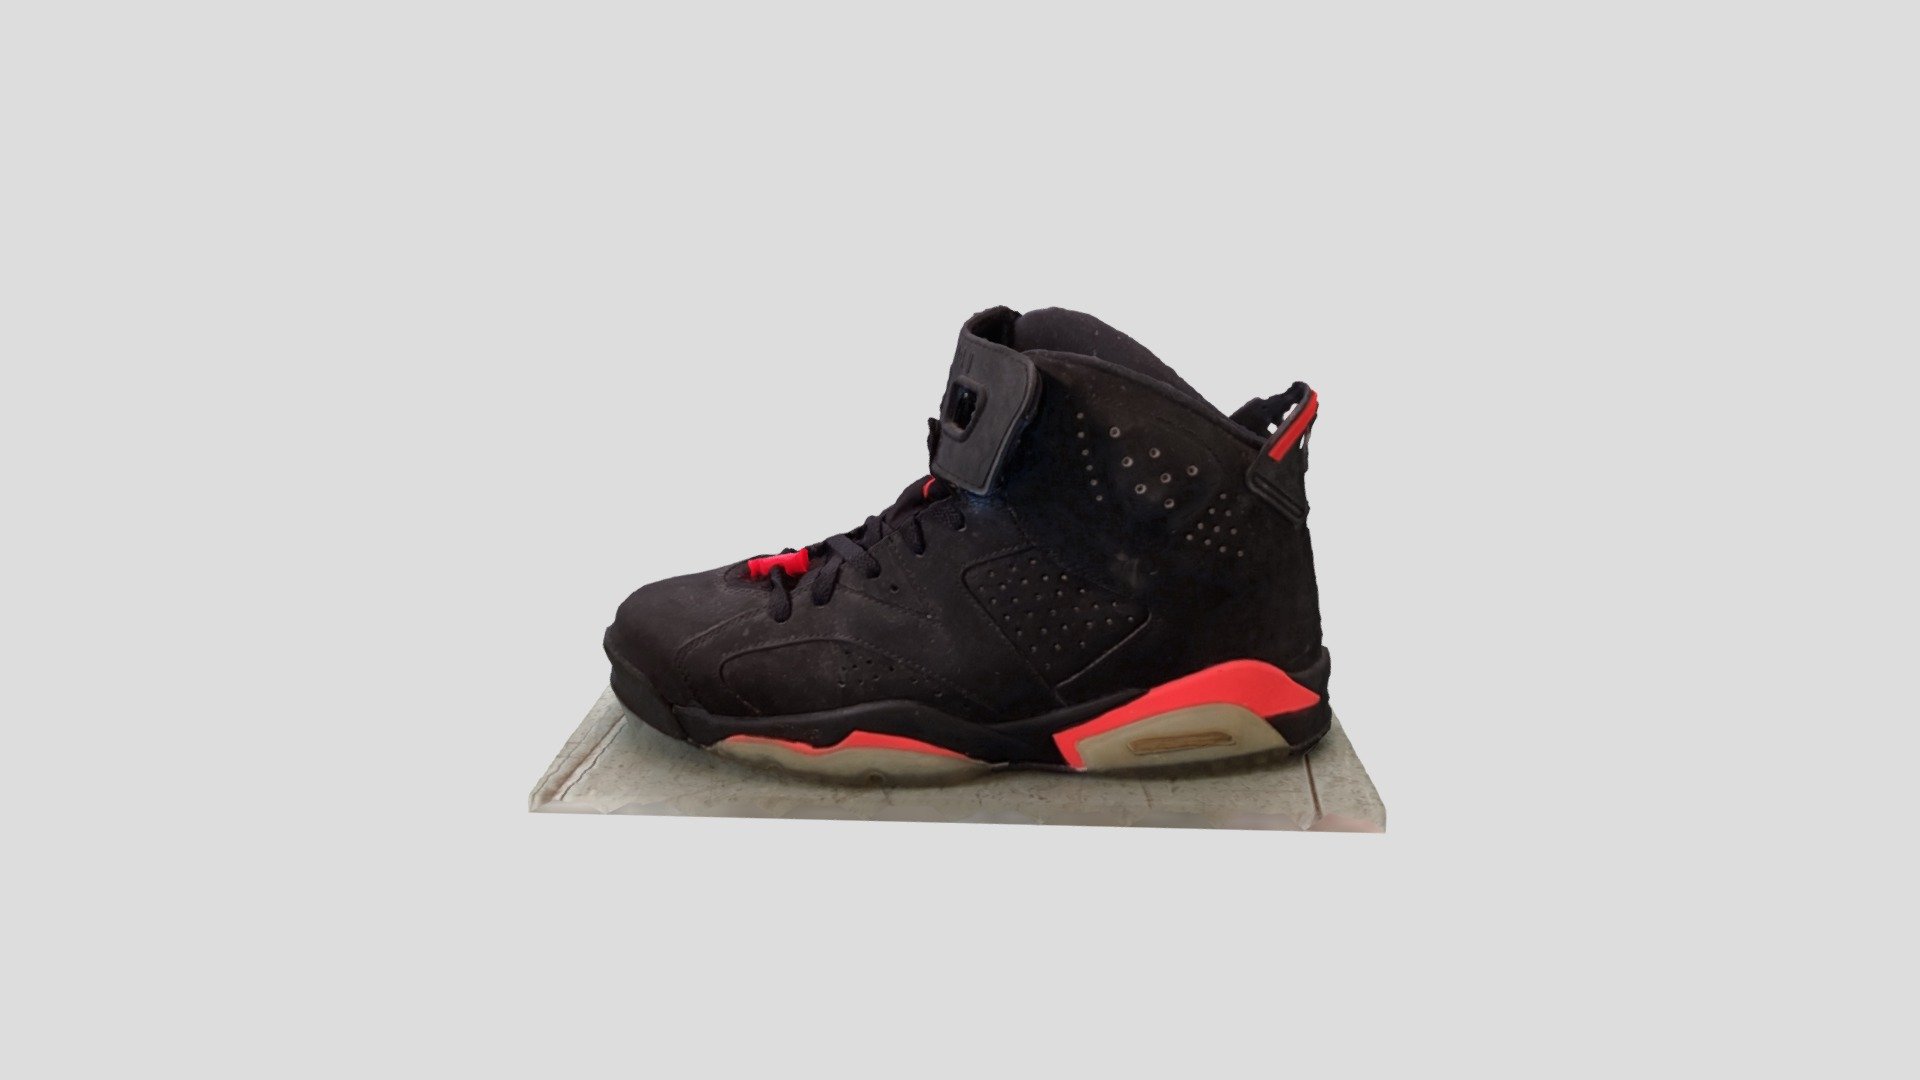 Left foot - Nike Air Jordan 6 Infrared size 12 shoe - Download Free 3D model by timbo1980 3d model